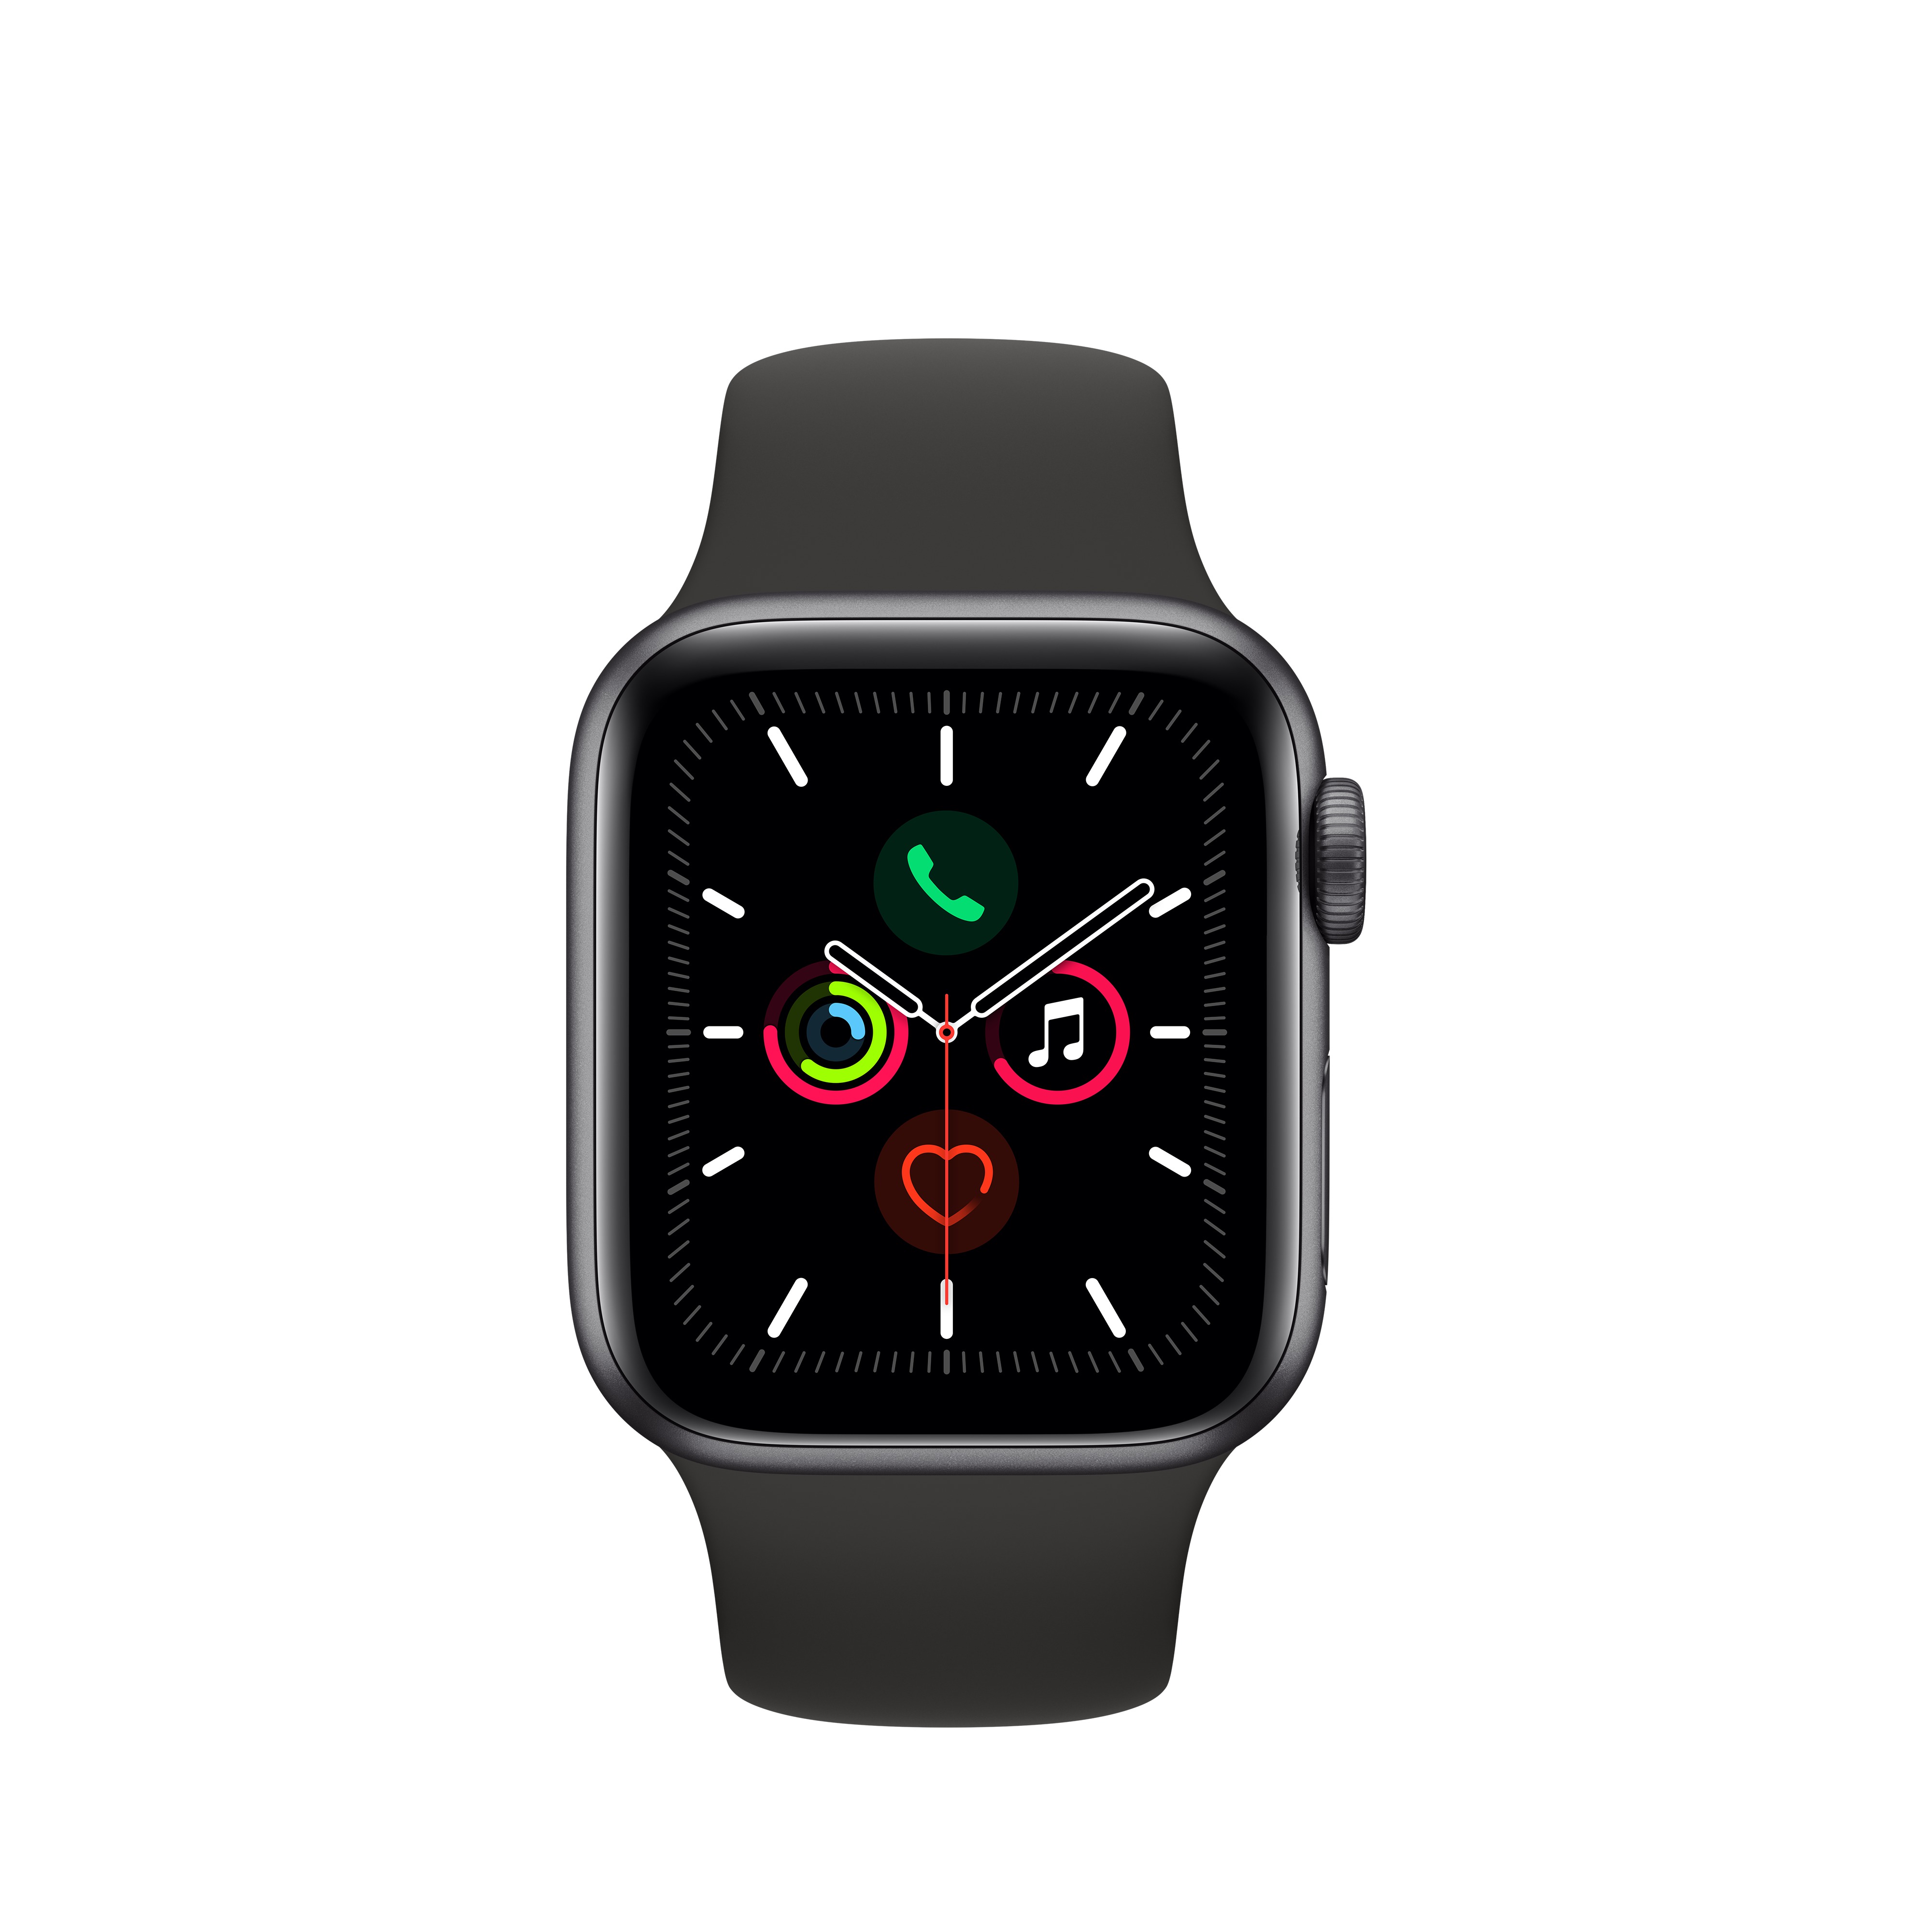 Apple Watch Series 5 GPS + Cellular, 40mm Space Gray Aluminum Case with Black Sport Band - S/M & M/L - image 5 of 6